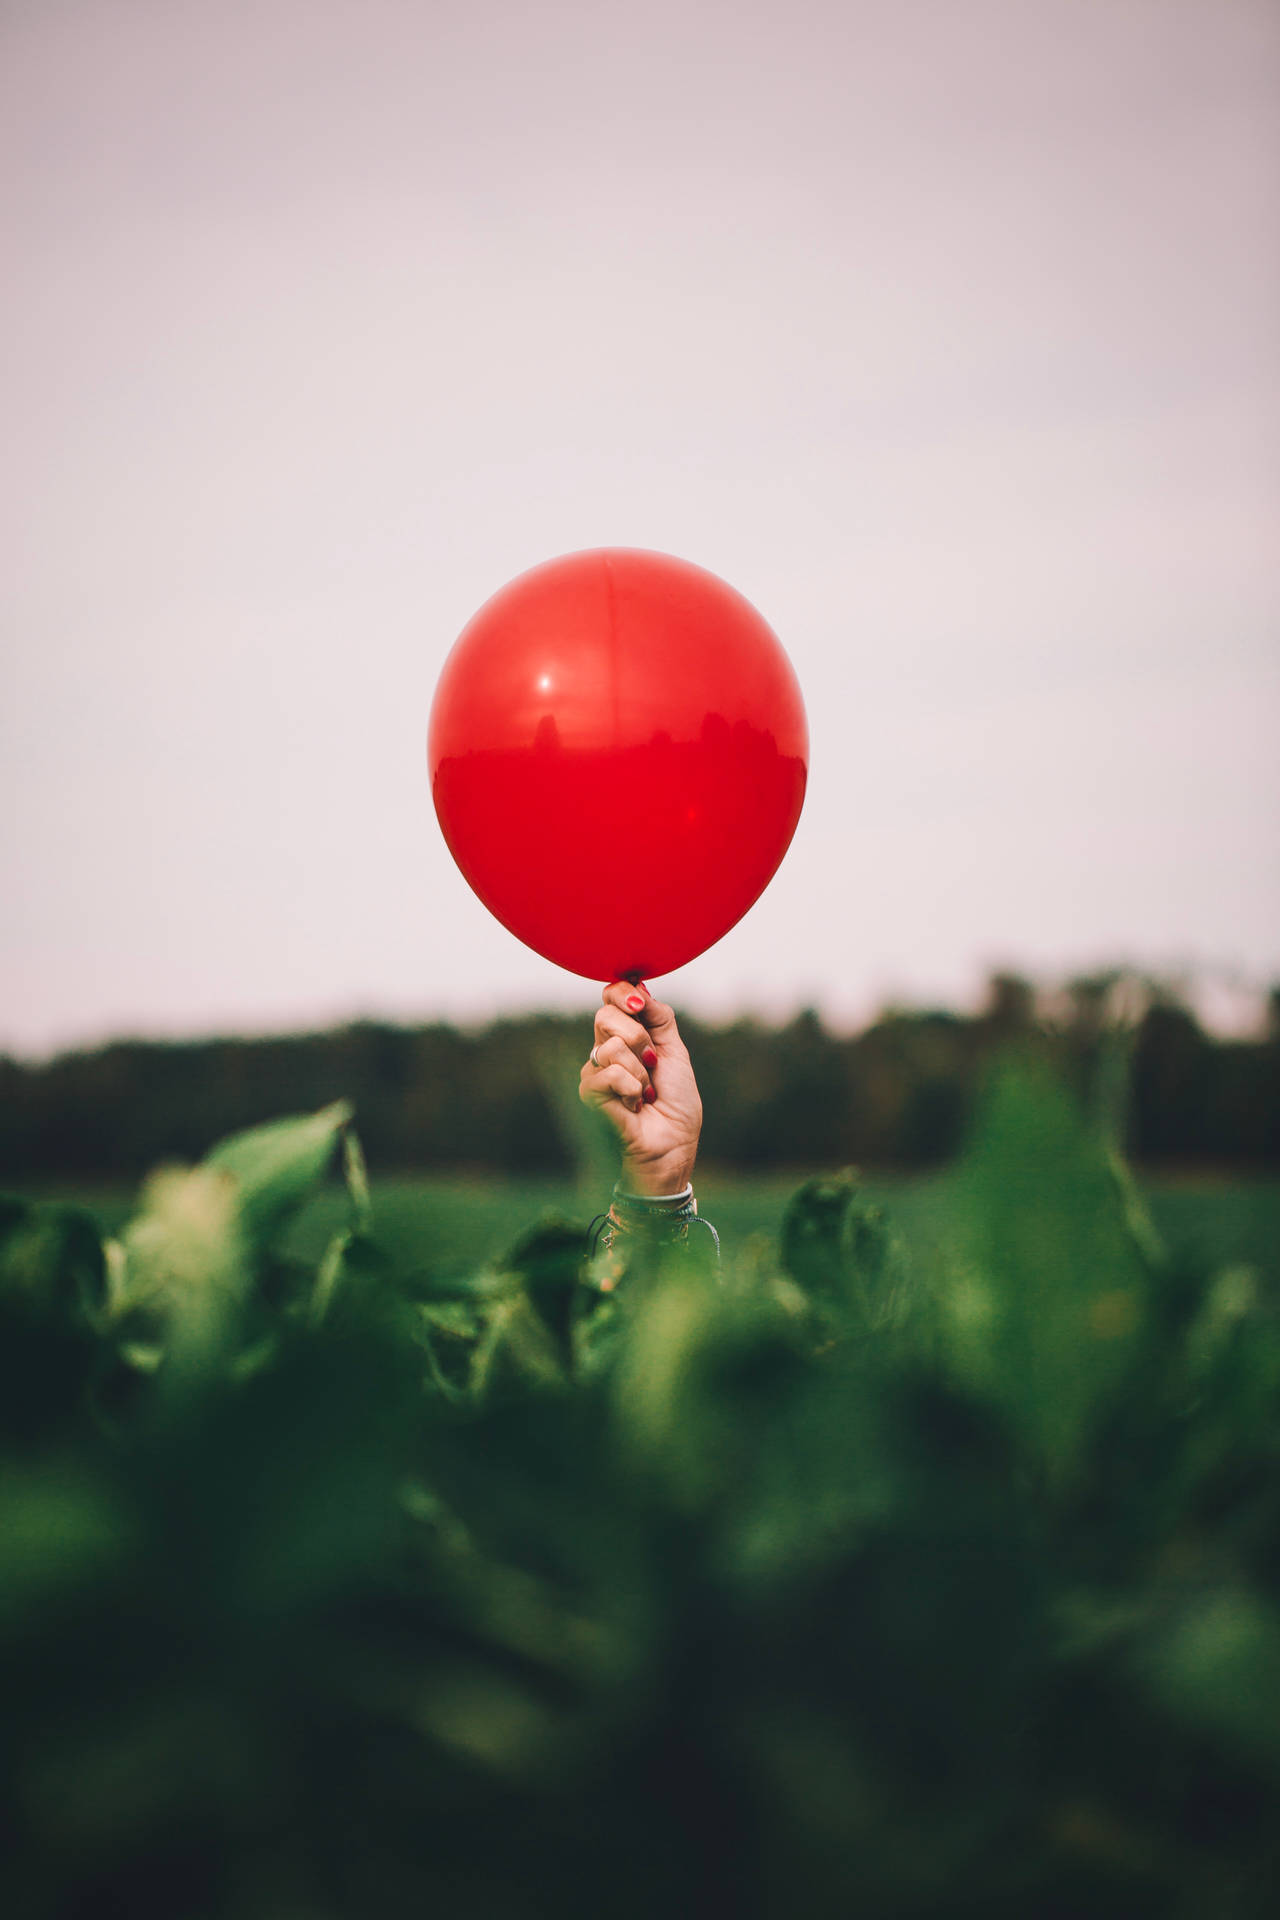 Red Glossy Balloon Over Green Plants Wallpaper